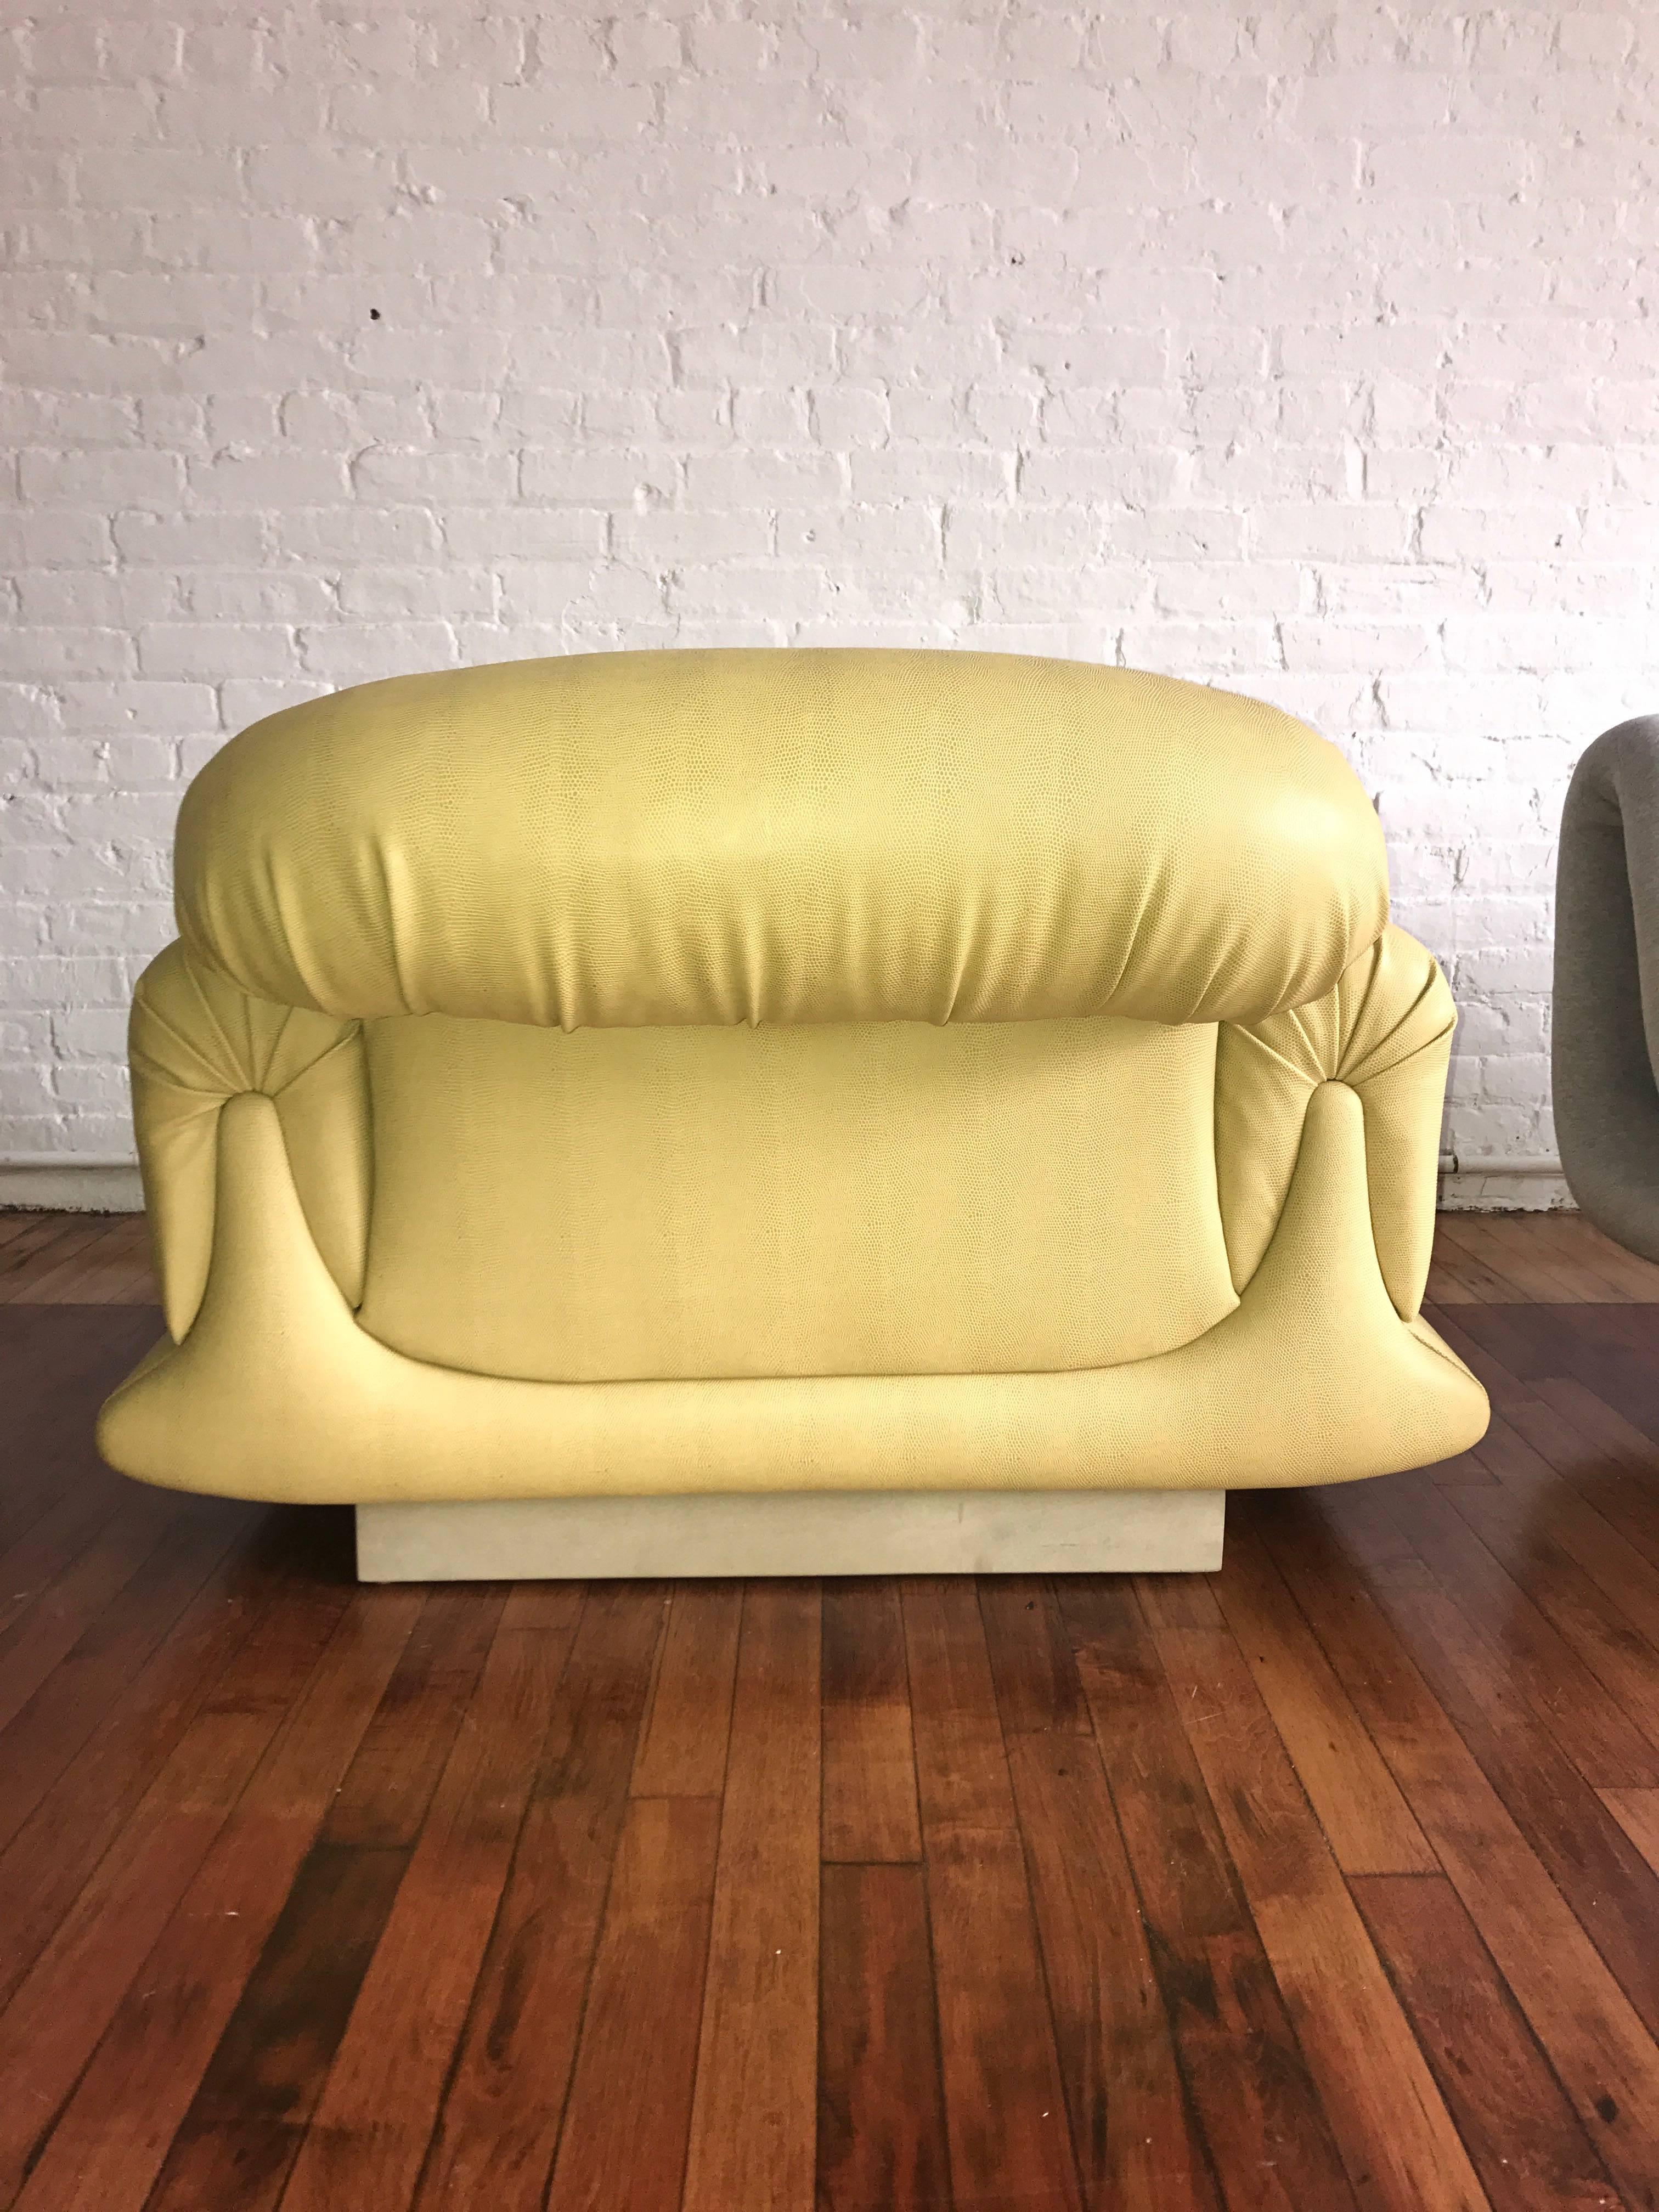 Mod overstuffed green lizard texture vinyl lounge chair.

Manner of Sergio Rodrigues.

Brazilian modern

Minor wear on arms and seat.

Wear consistent with age.

Used items may have wear and/or flaws which the pictures cannot depict. All